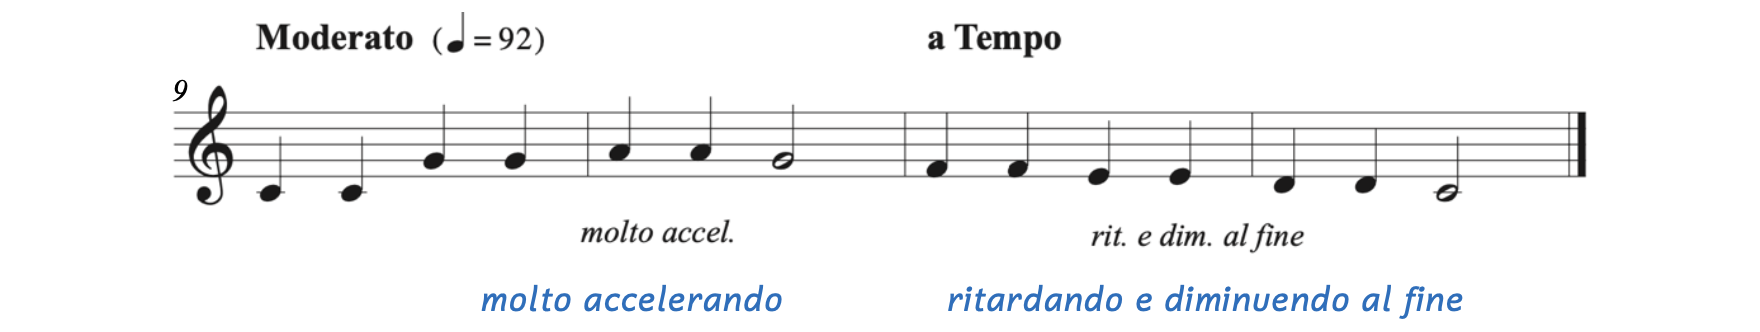 The example begins at measure 9. "Twinkle Twinkle Little Star" begins moderato with a quarter note equaling 92. In measure 10, the score is marked "molto accelerando." At the start of measure 11, the score is marked "a Tempo." In measure 11 to 12, the score is marked "ritardando e diminuendo al fee-nay."